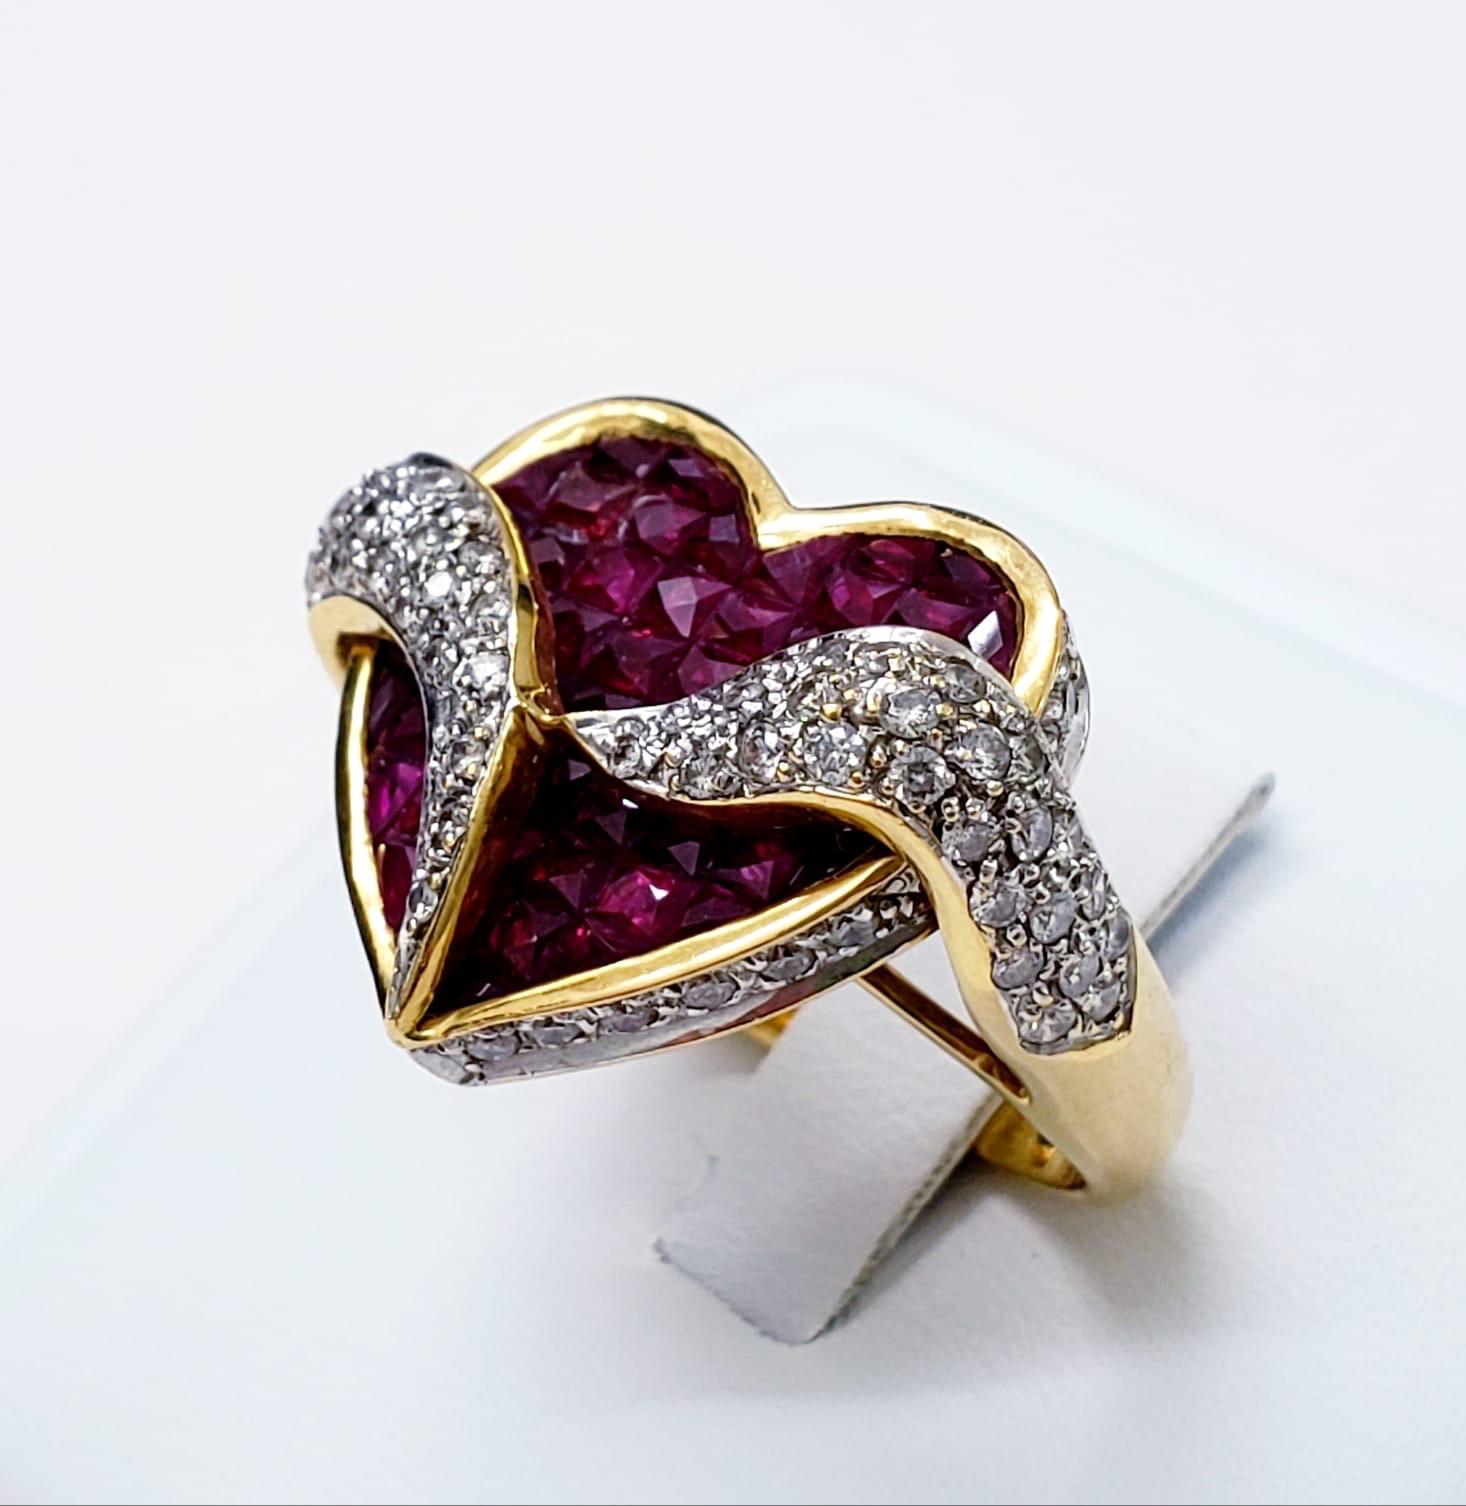 Estate Diamonds 7.10ct Ruby 18k Gold Heart Cluster Cocktail Ring. The total carat weight of the diamonds is 1.10ct & Ruby’s 6 carats total weight. The ring weights 11 grams. The ring measures 25mm X 19mm. The ring size is 5.5
Circa 1980’s